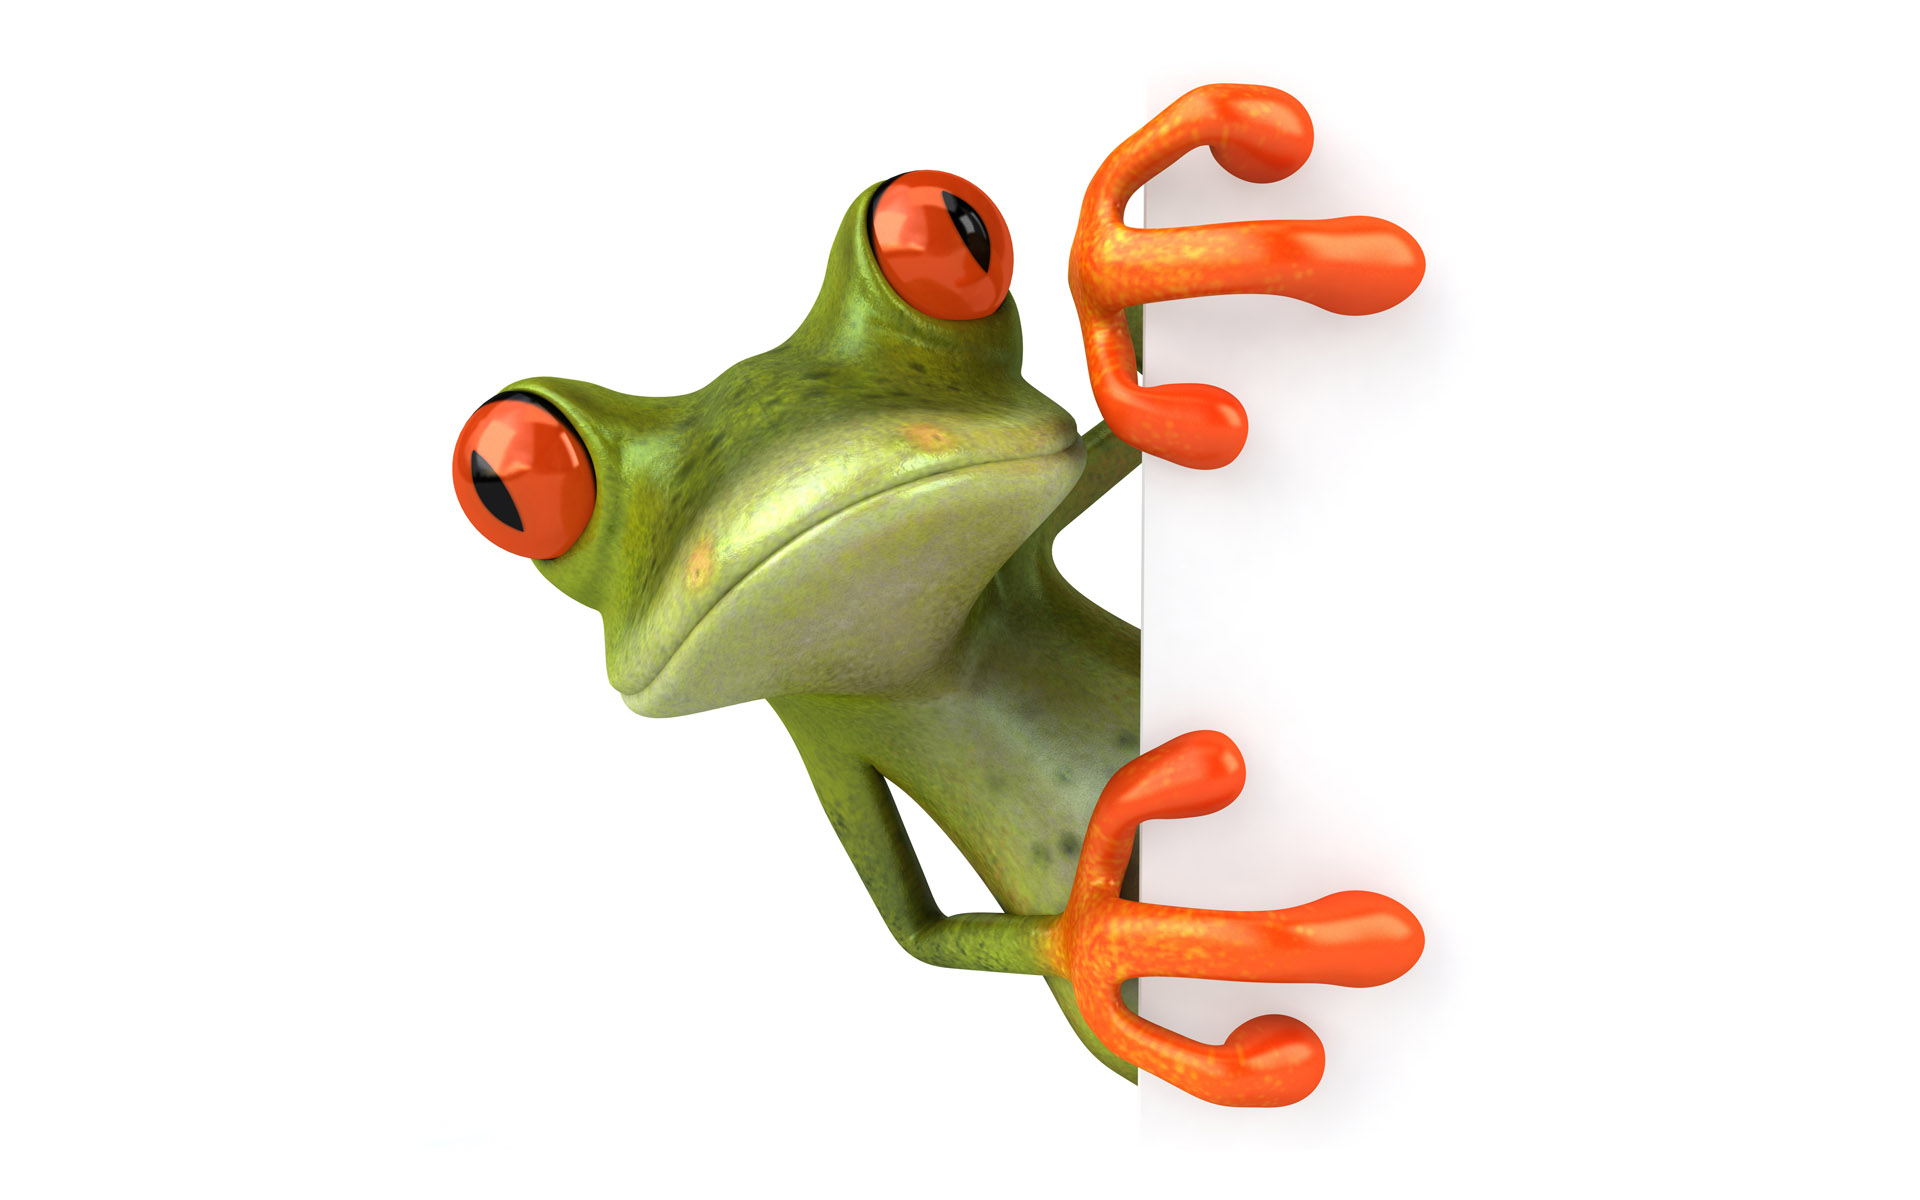 frog 3d wallpaper for desktop is a great wallpaper for your computer 1920x1200